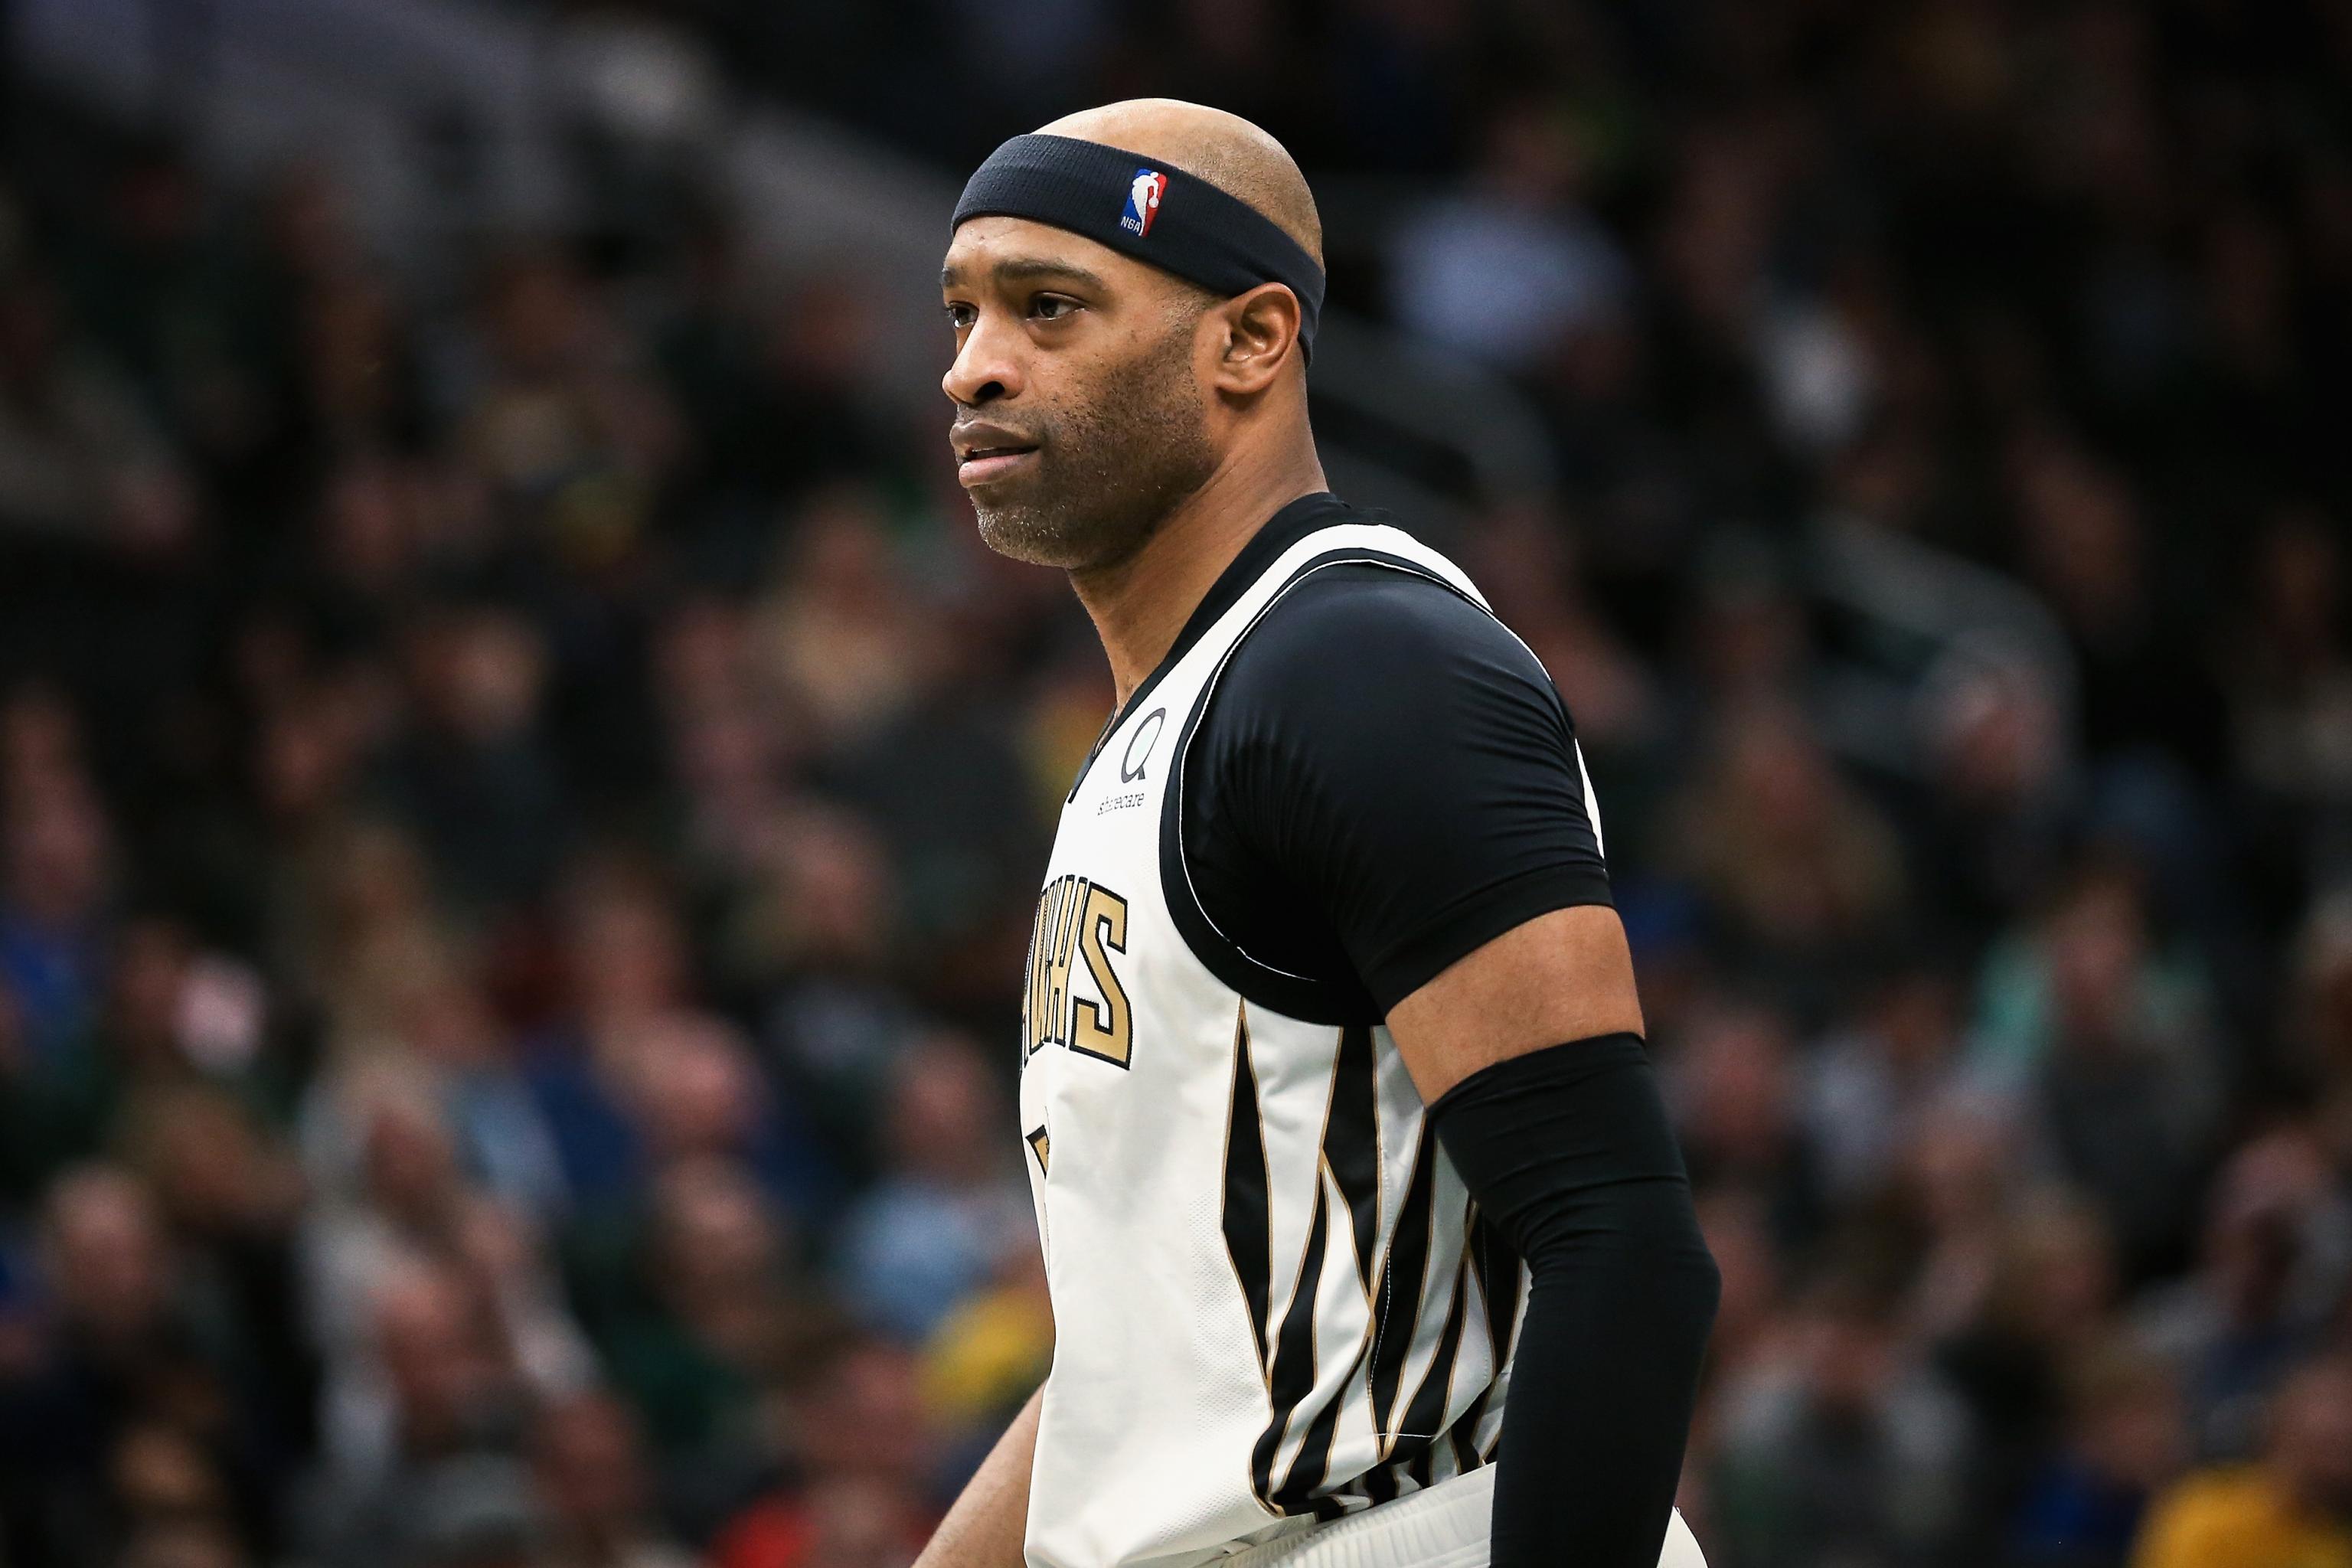 ESPN Signs Eight-Time NBA All Star Vince Carter to Multi-Year Deal